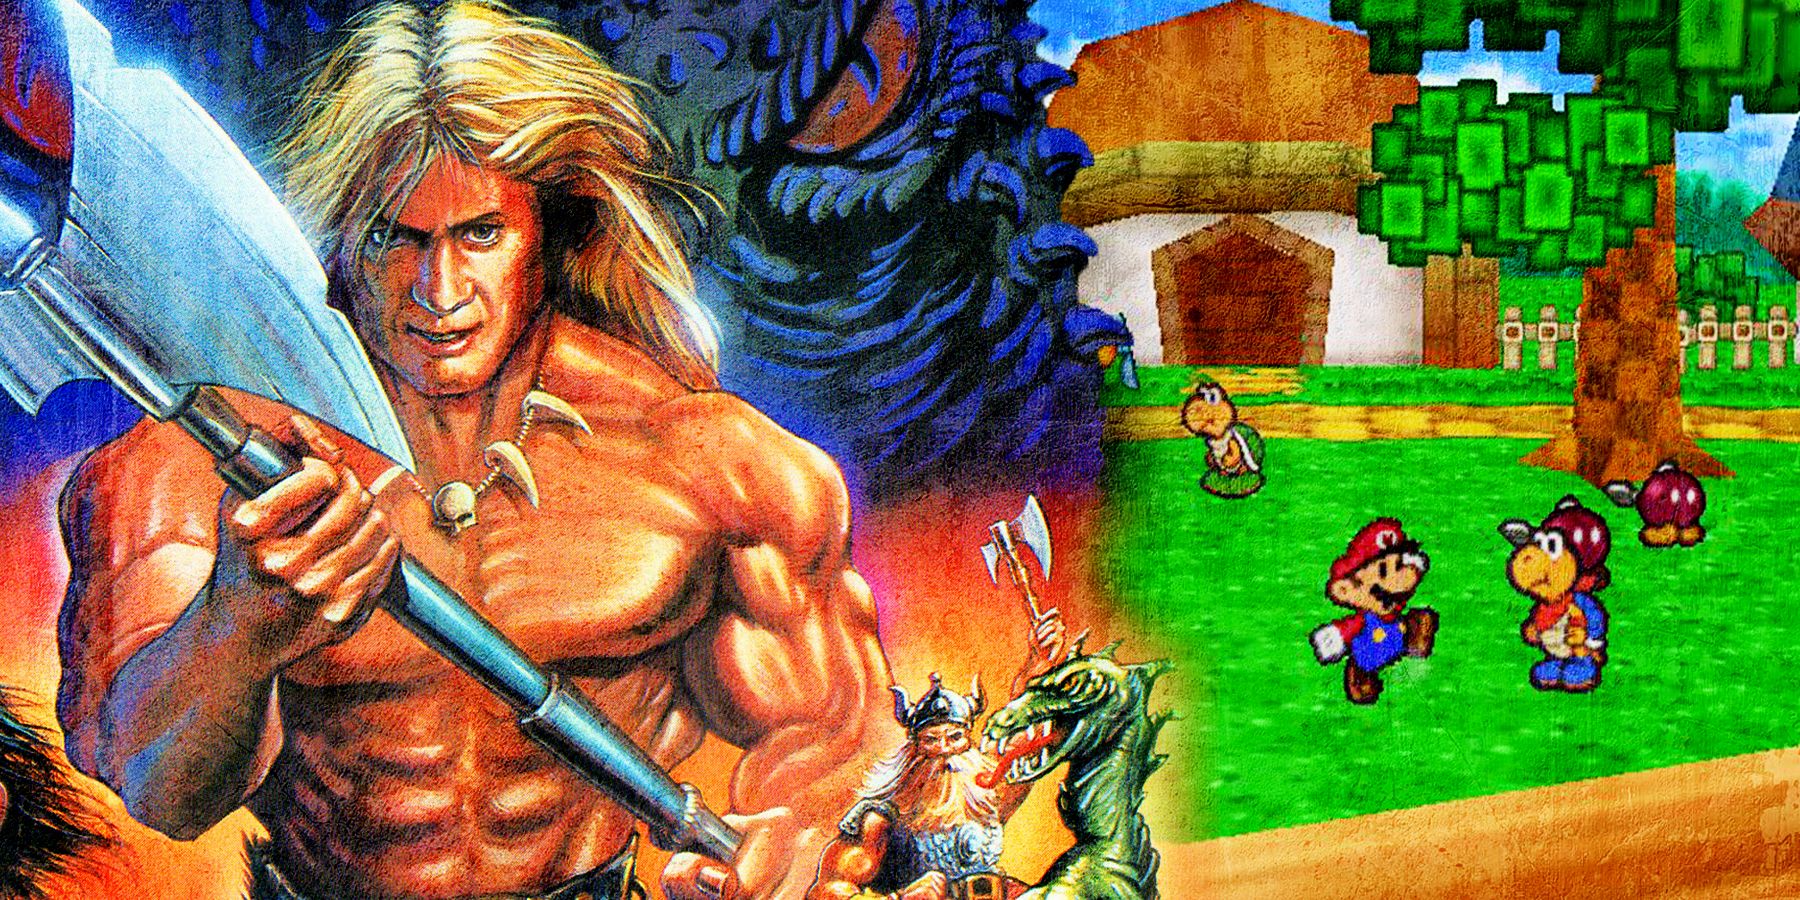 All NES classic games coming to Nintendo Switch Online